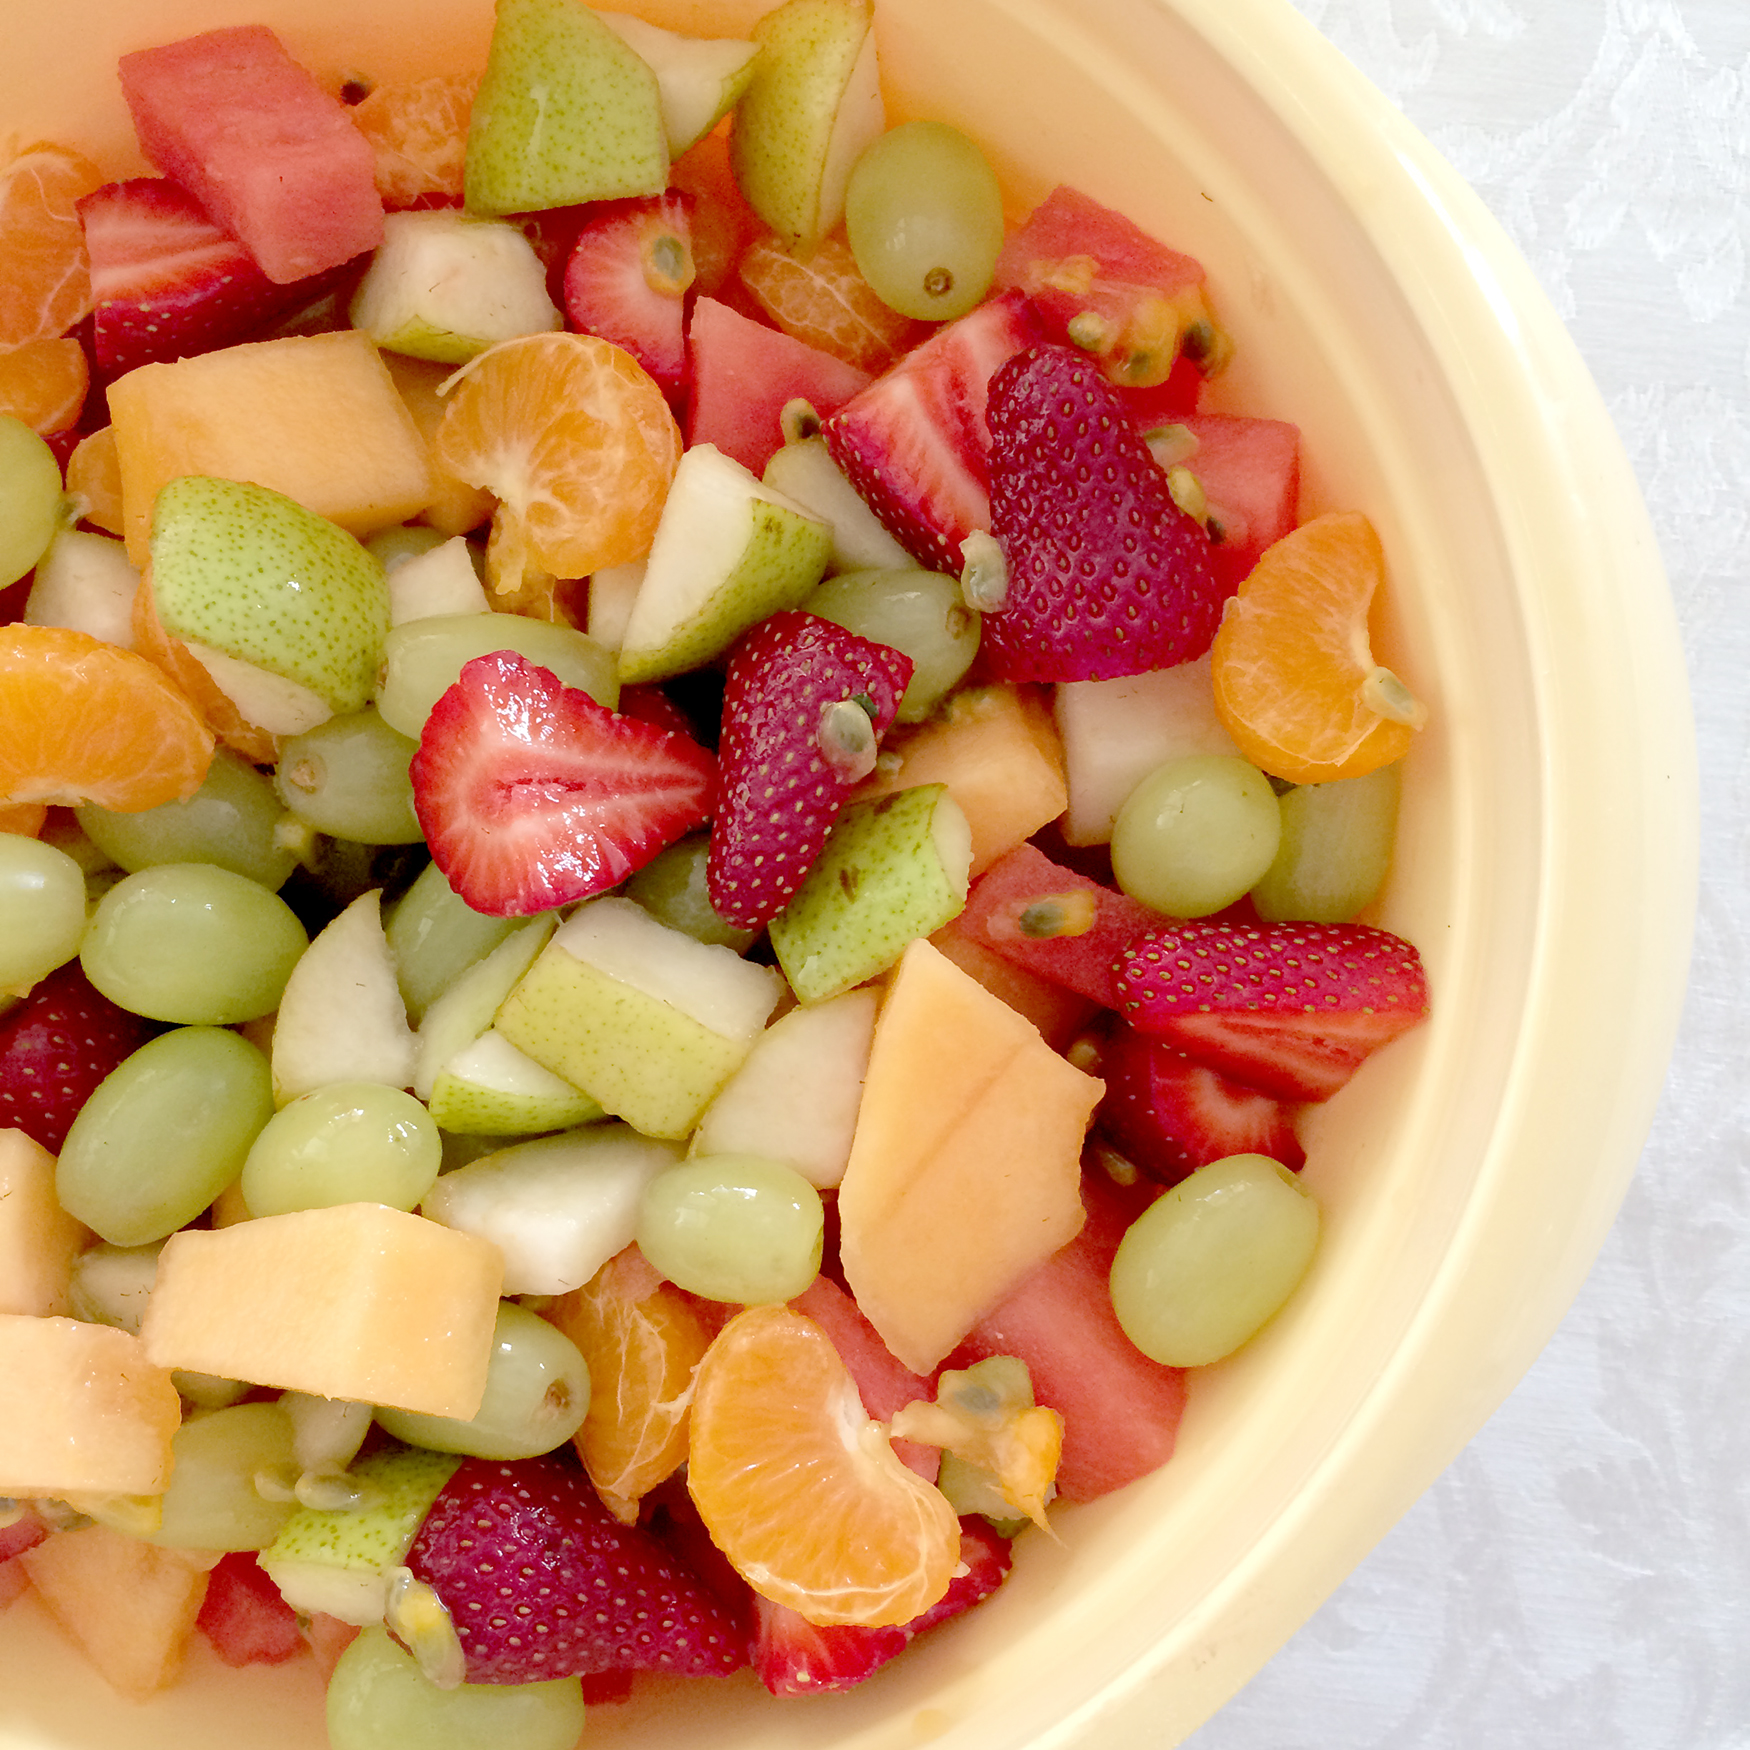 Get the kids in the kitchen making healthy snacks, fruit salad is easy to prepare and a great way to help them learn about preparing food in the kitchen.